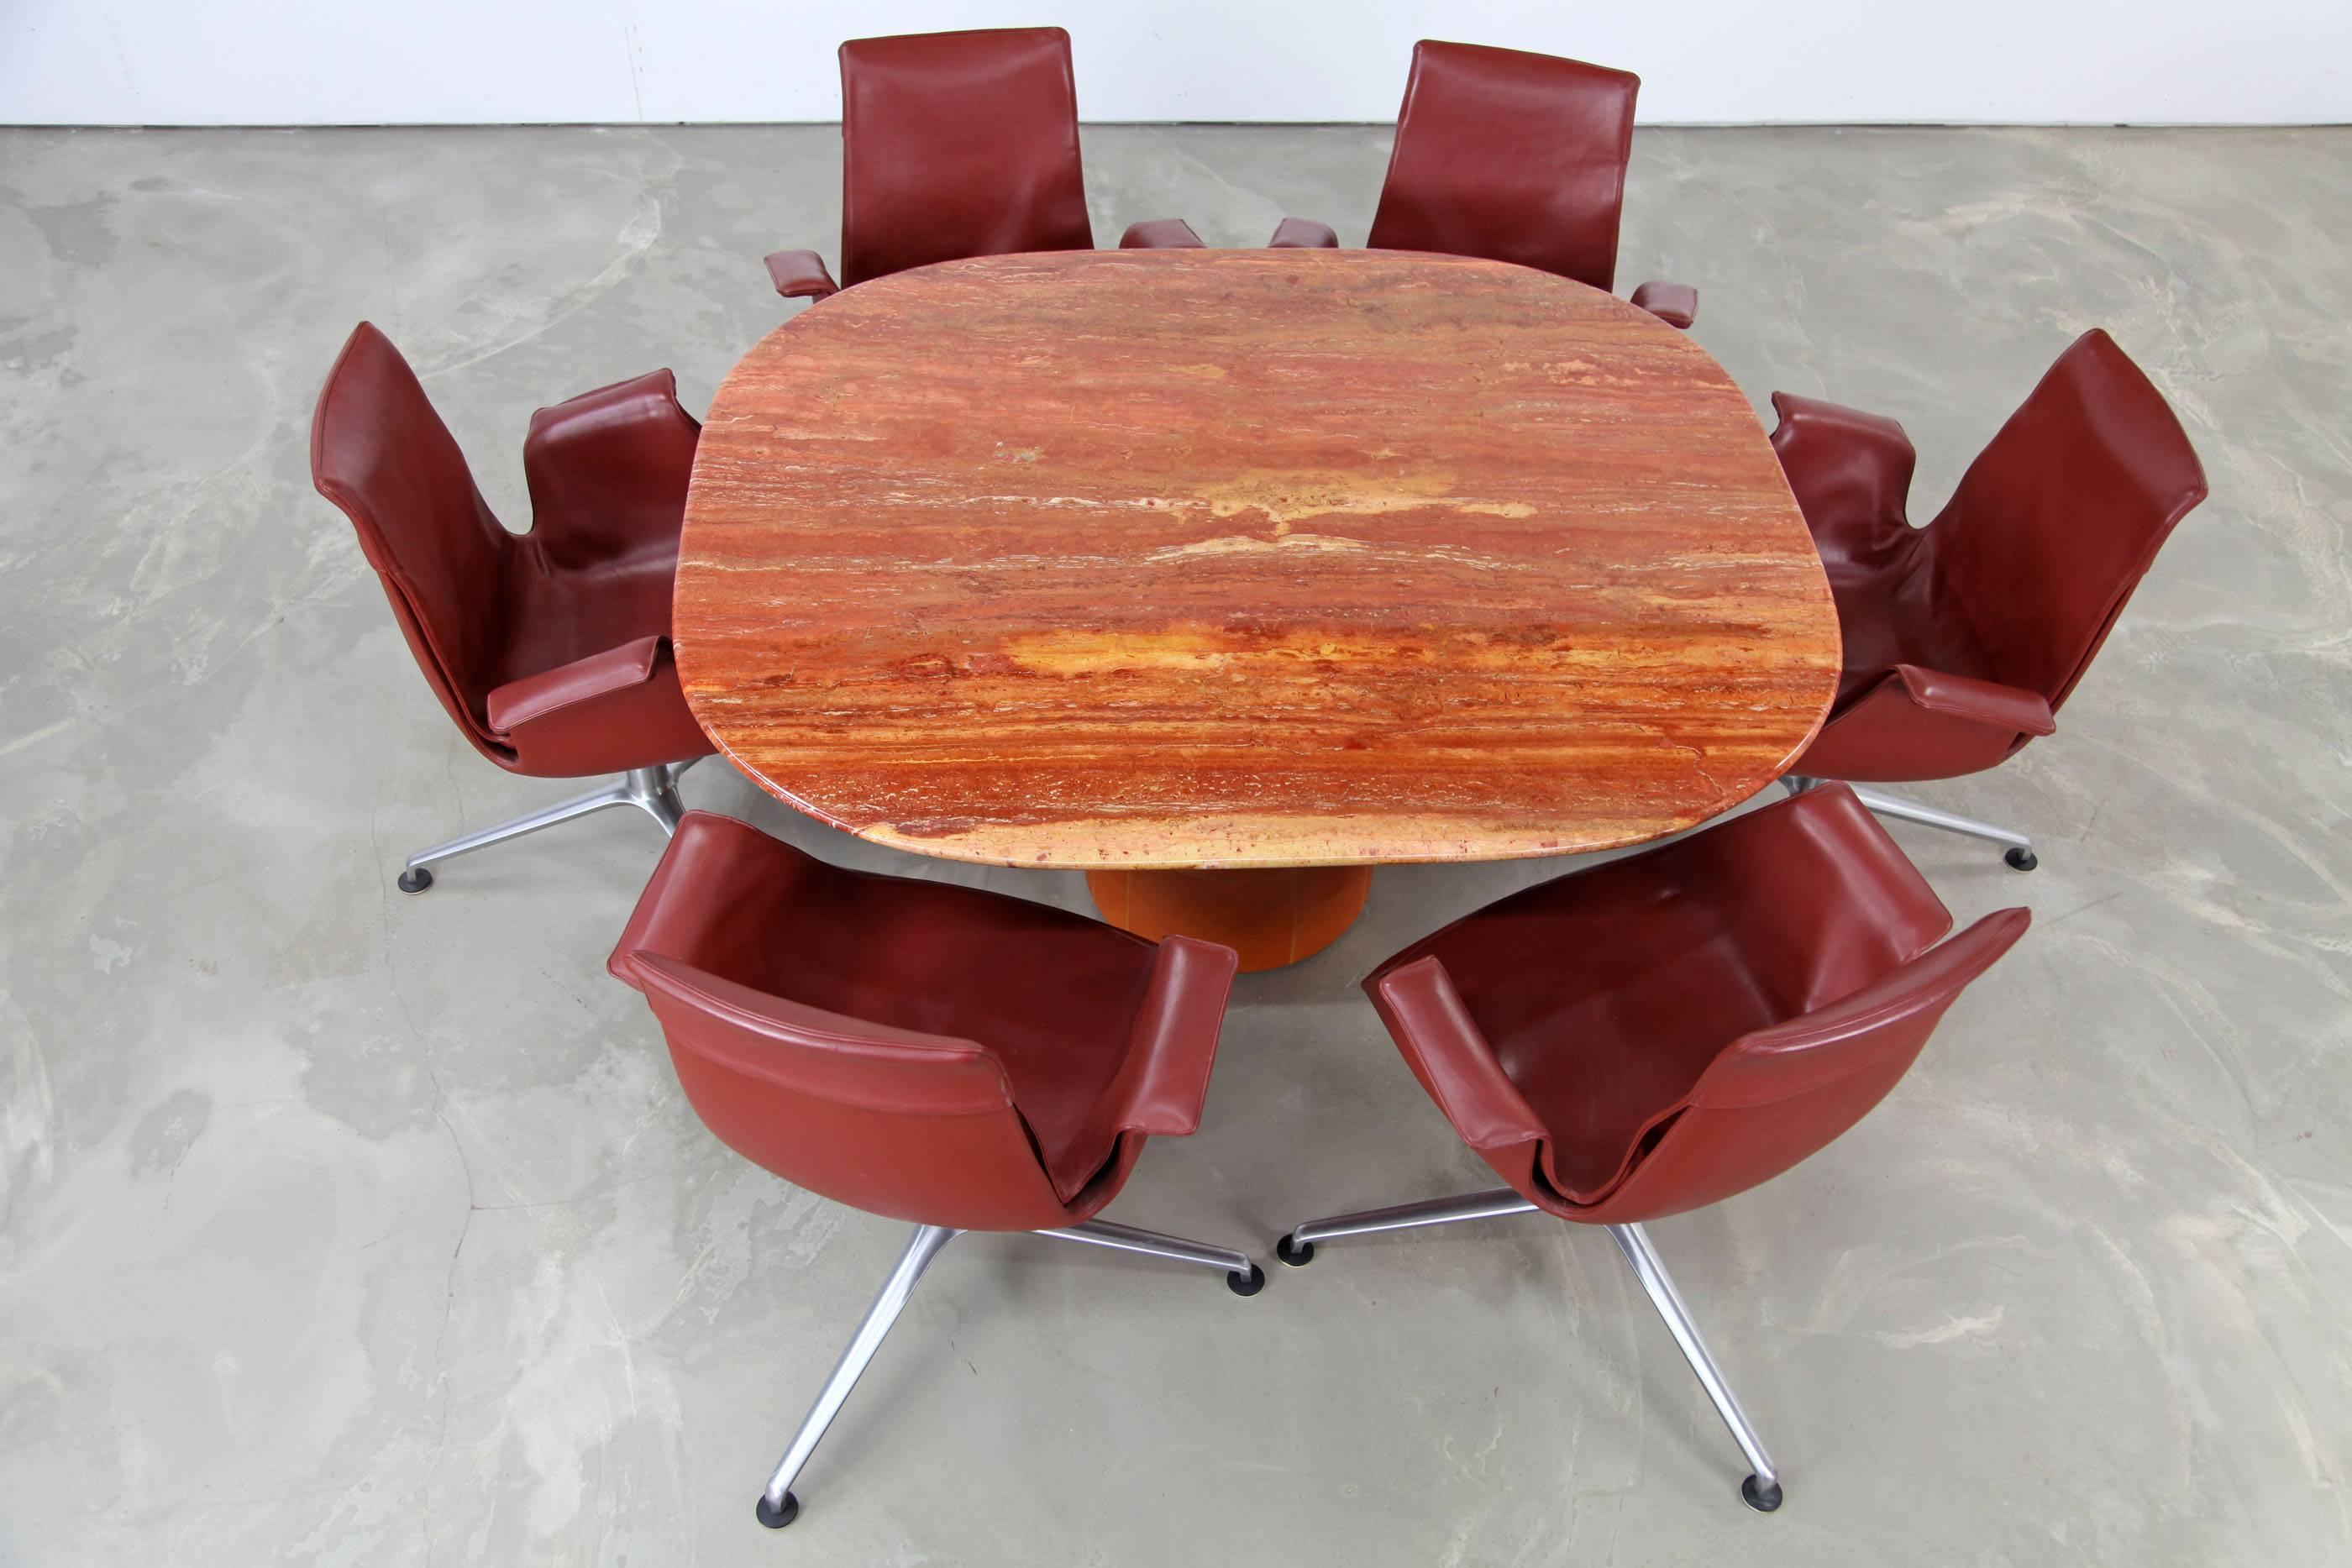 Extravagant table made by B & B Italia. This piece features a top made of red travertine and a base wrapped with leather. It's in excellent condition.